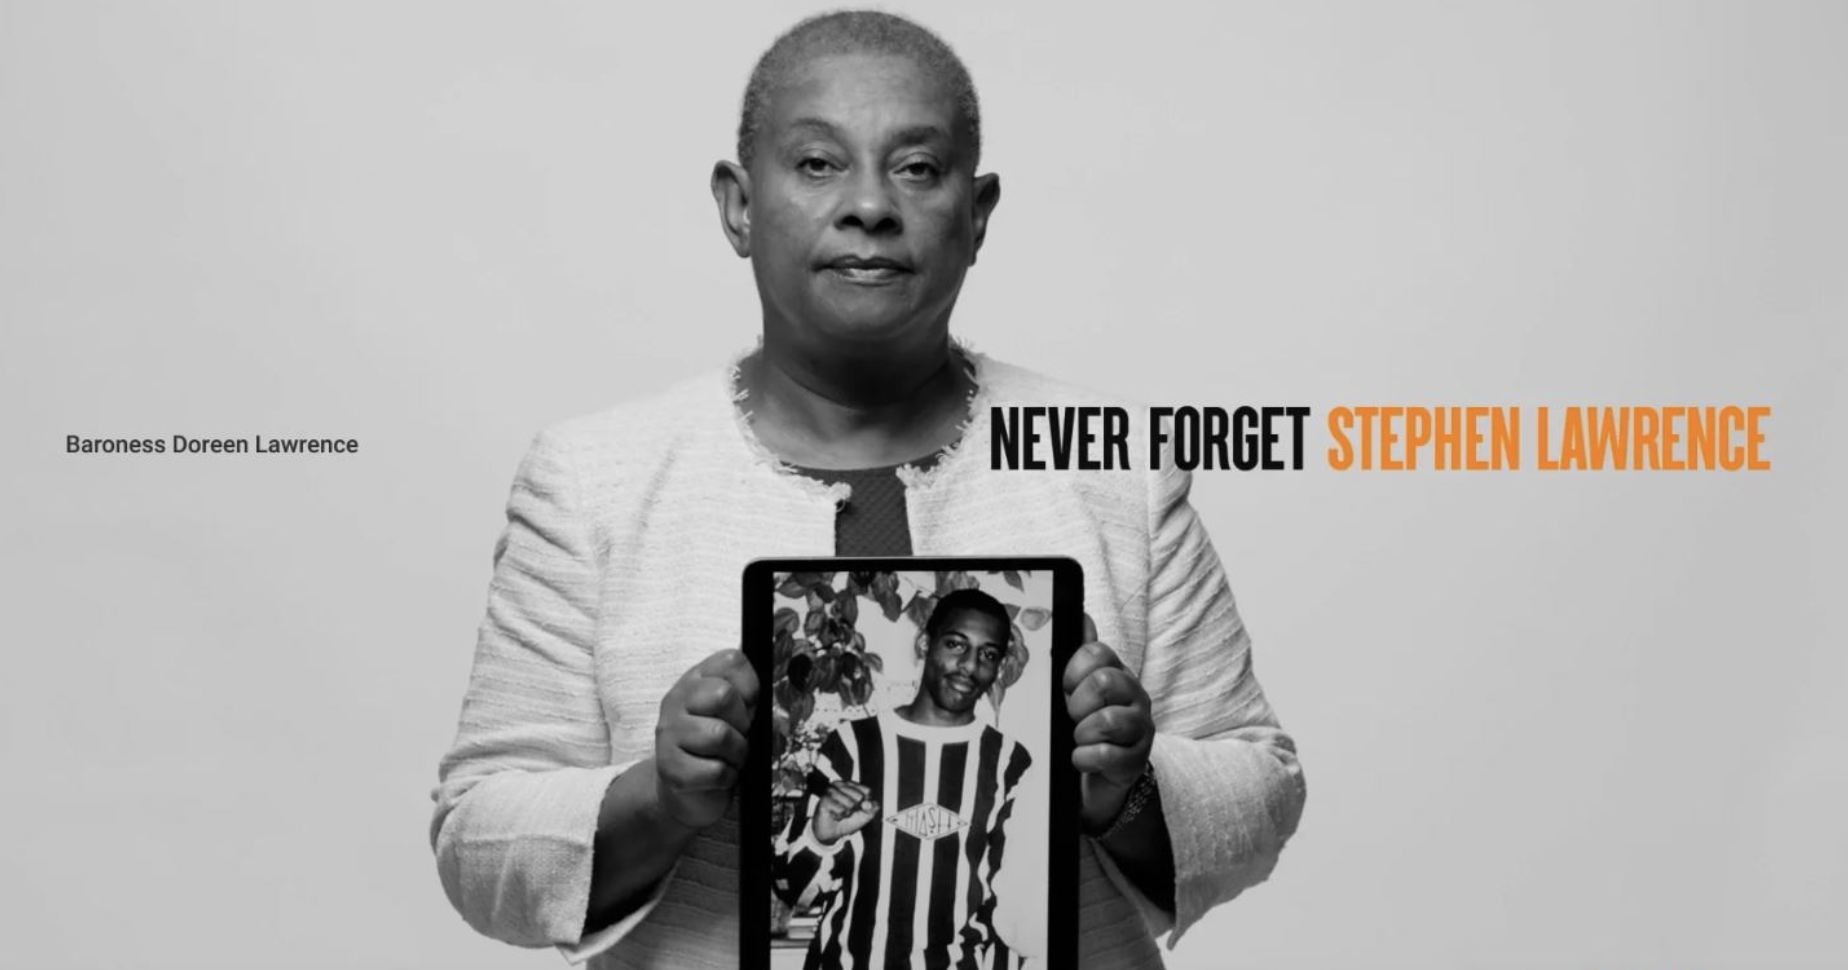 STEPHEN LAWRENCE DAY